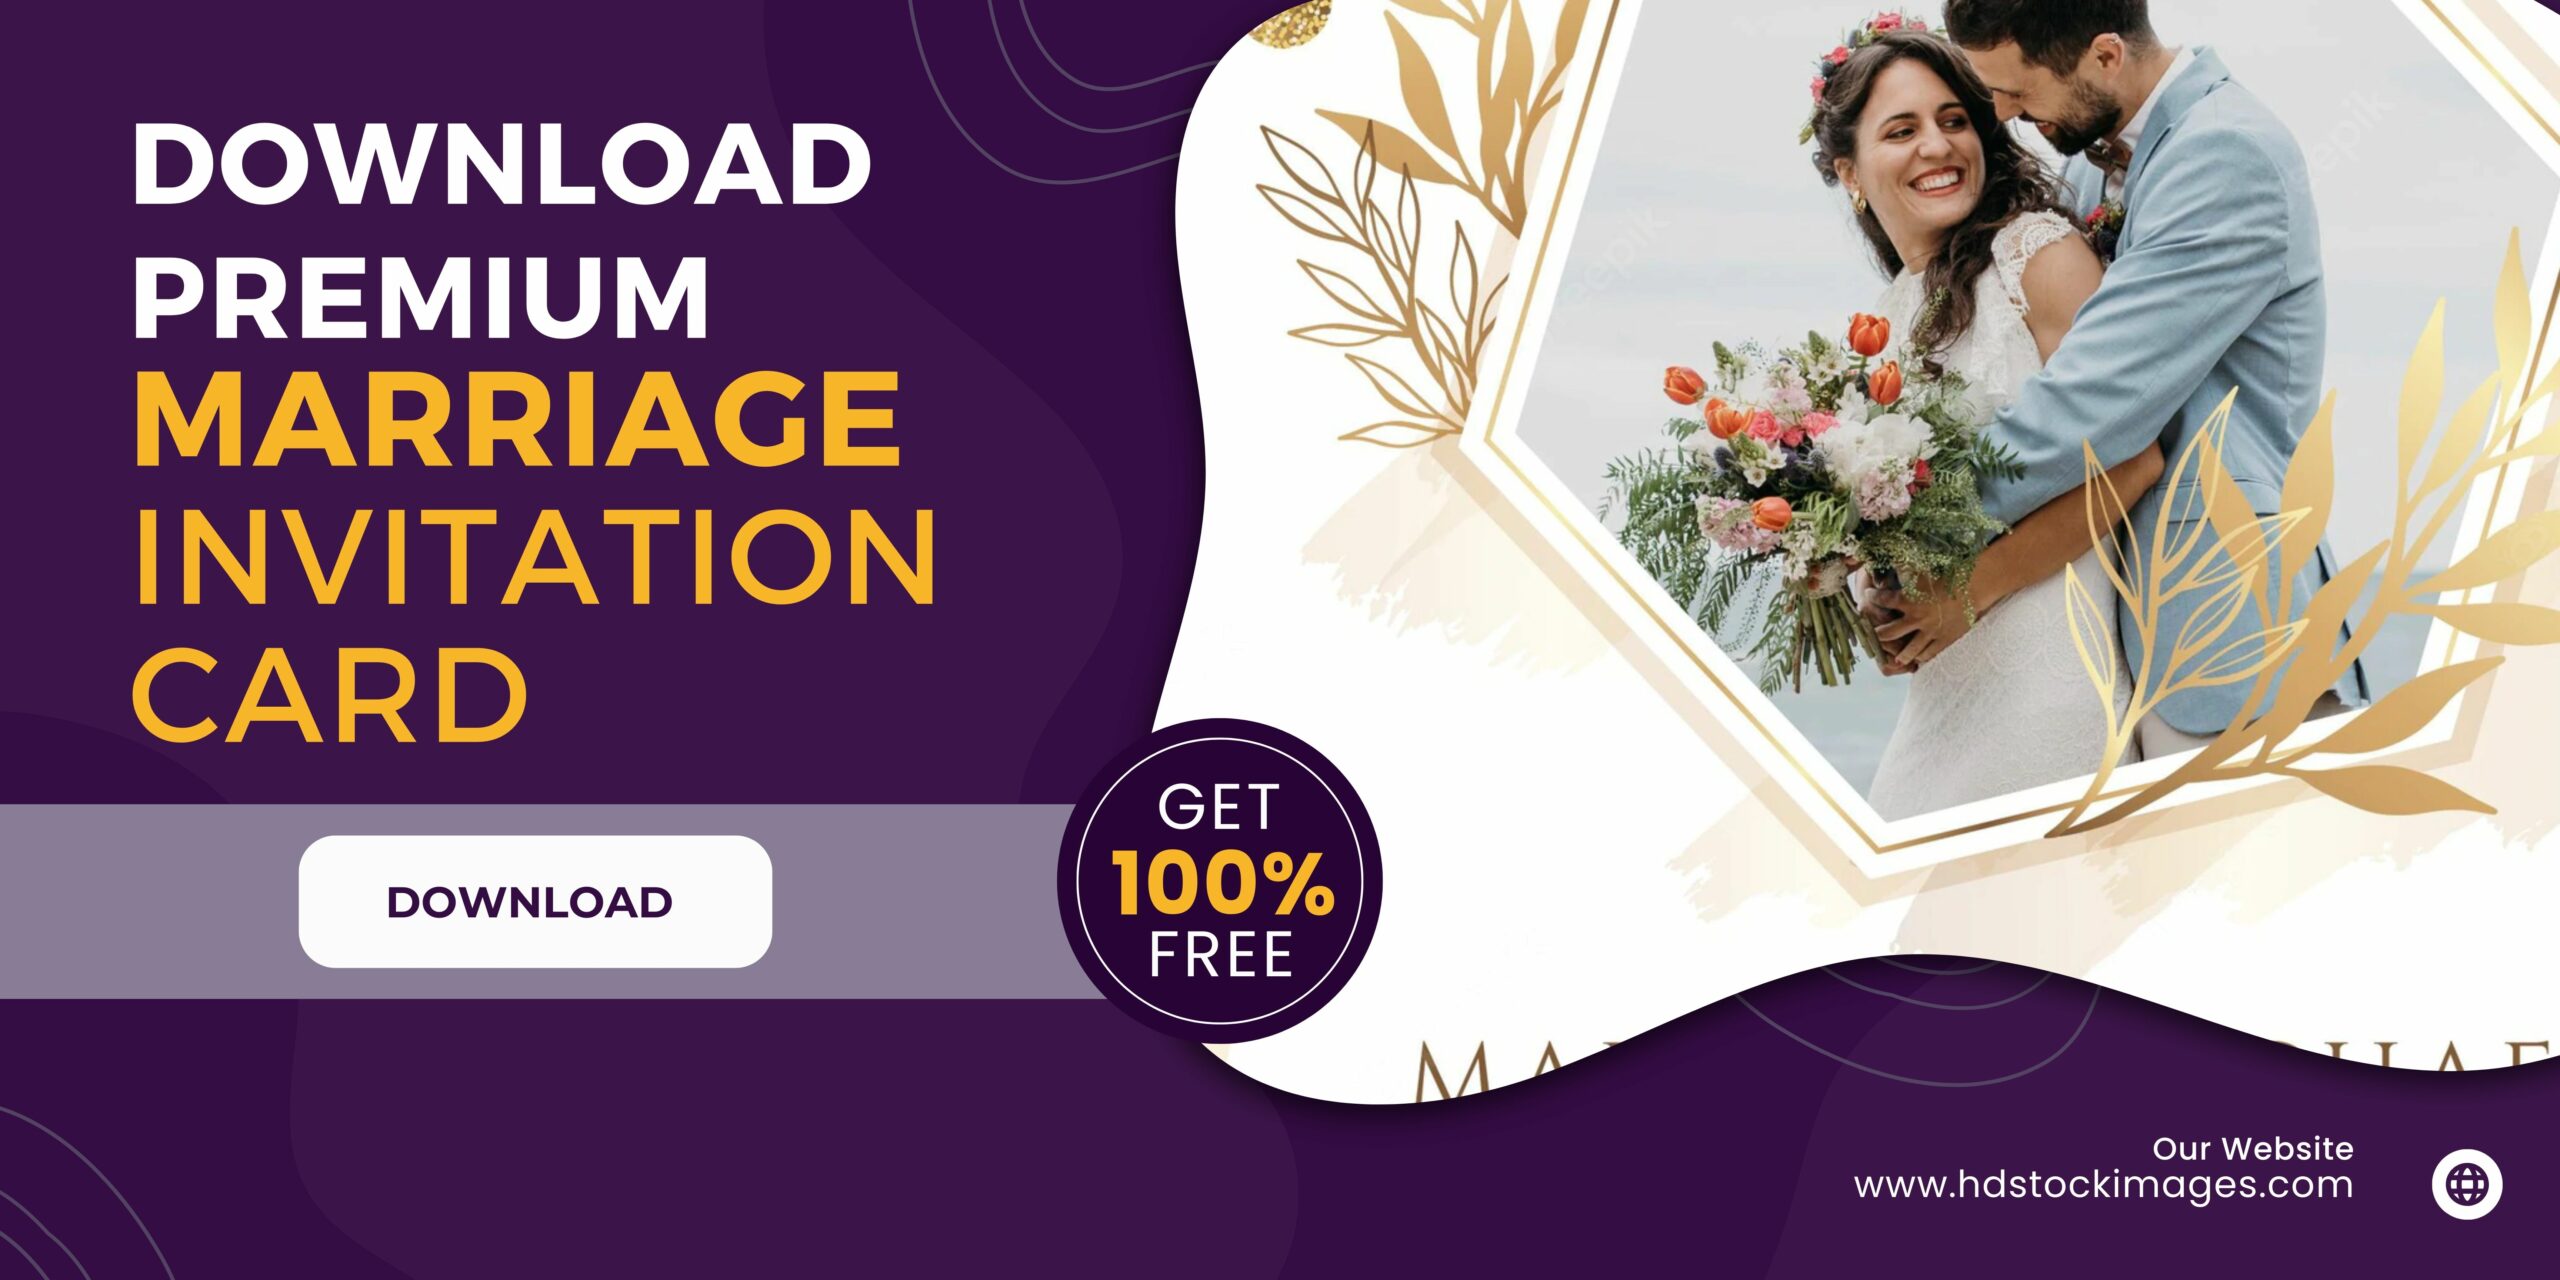 Download 20 Premium Marriage Invitation Cards for free